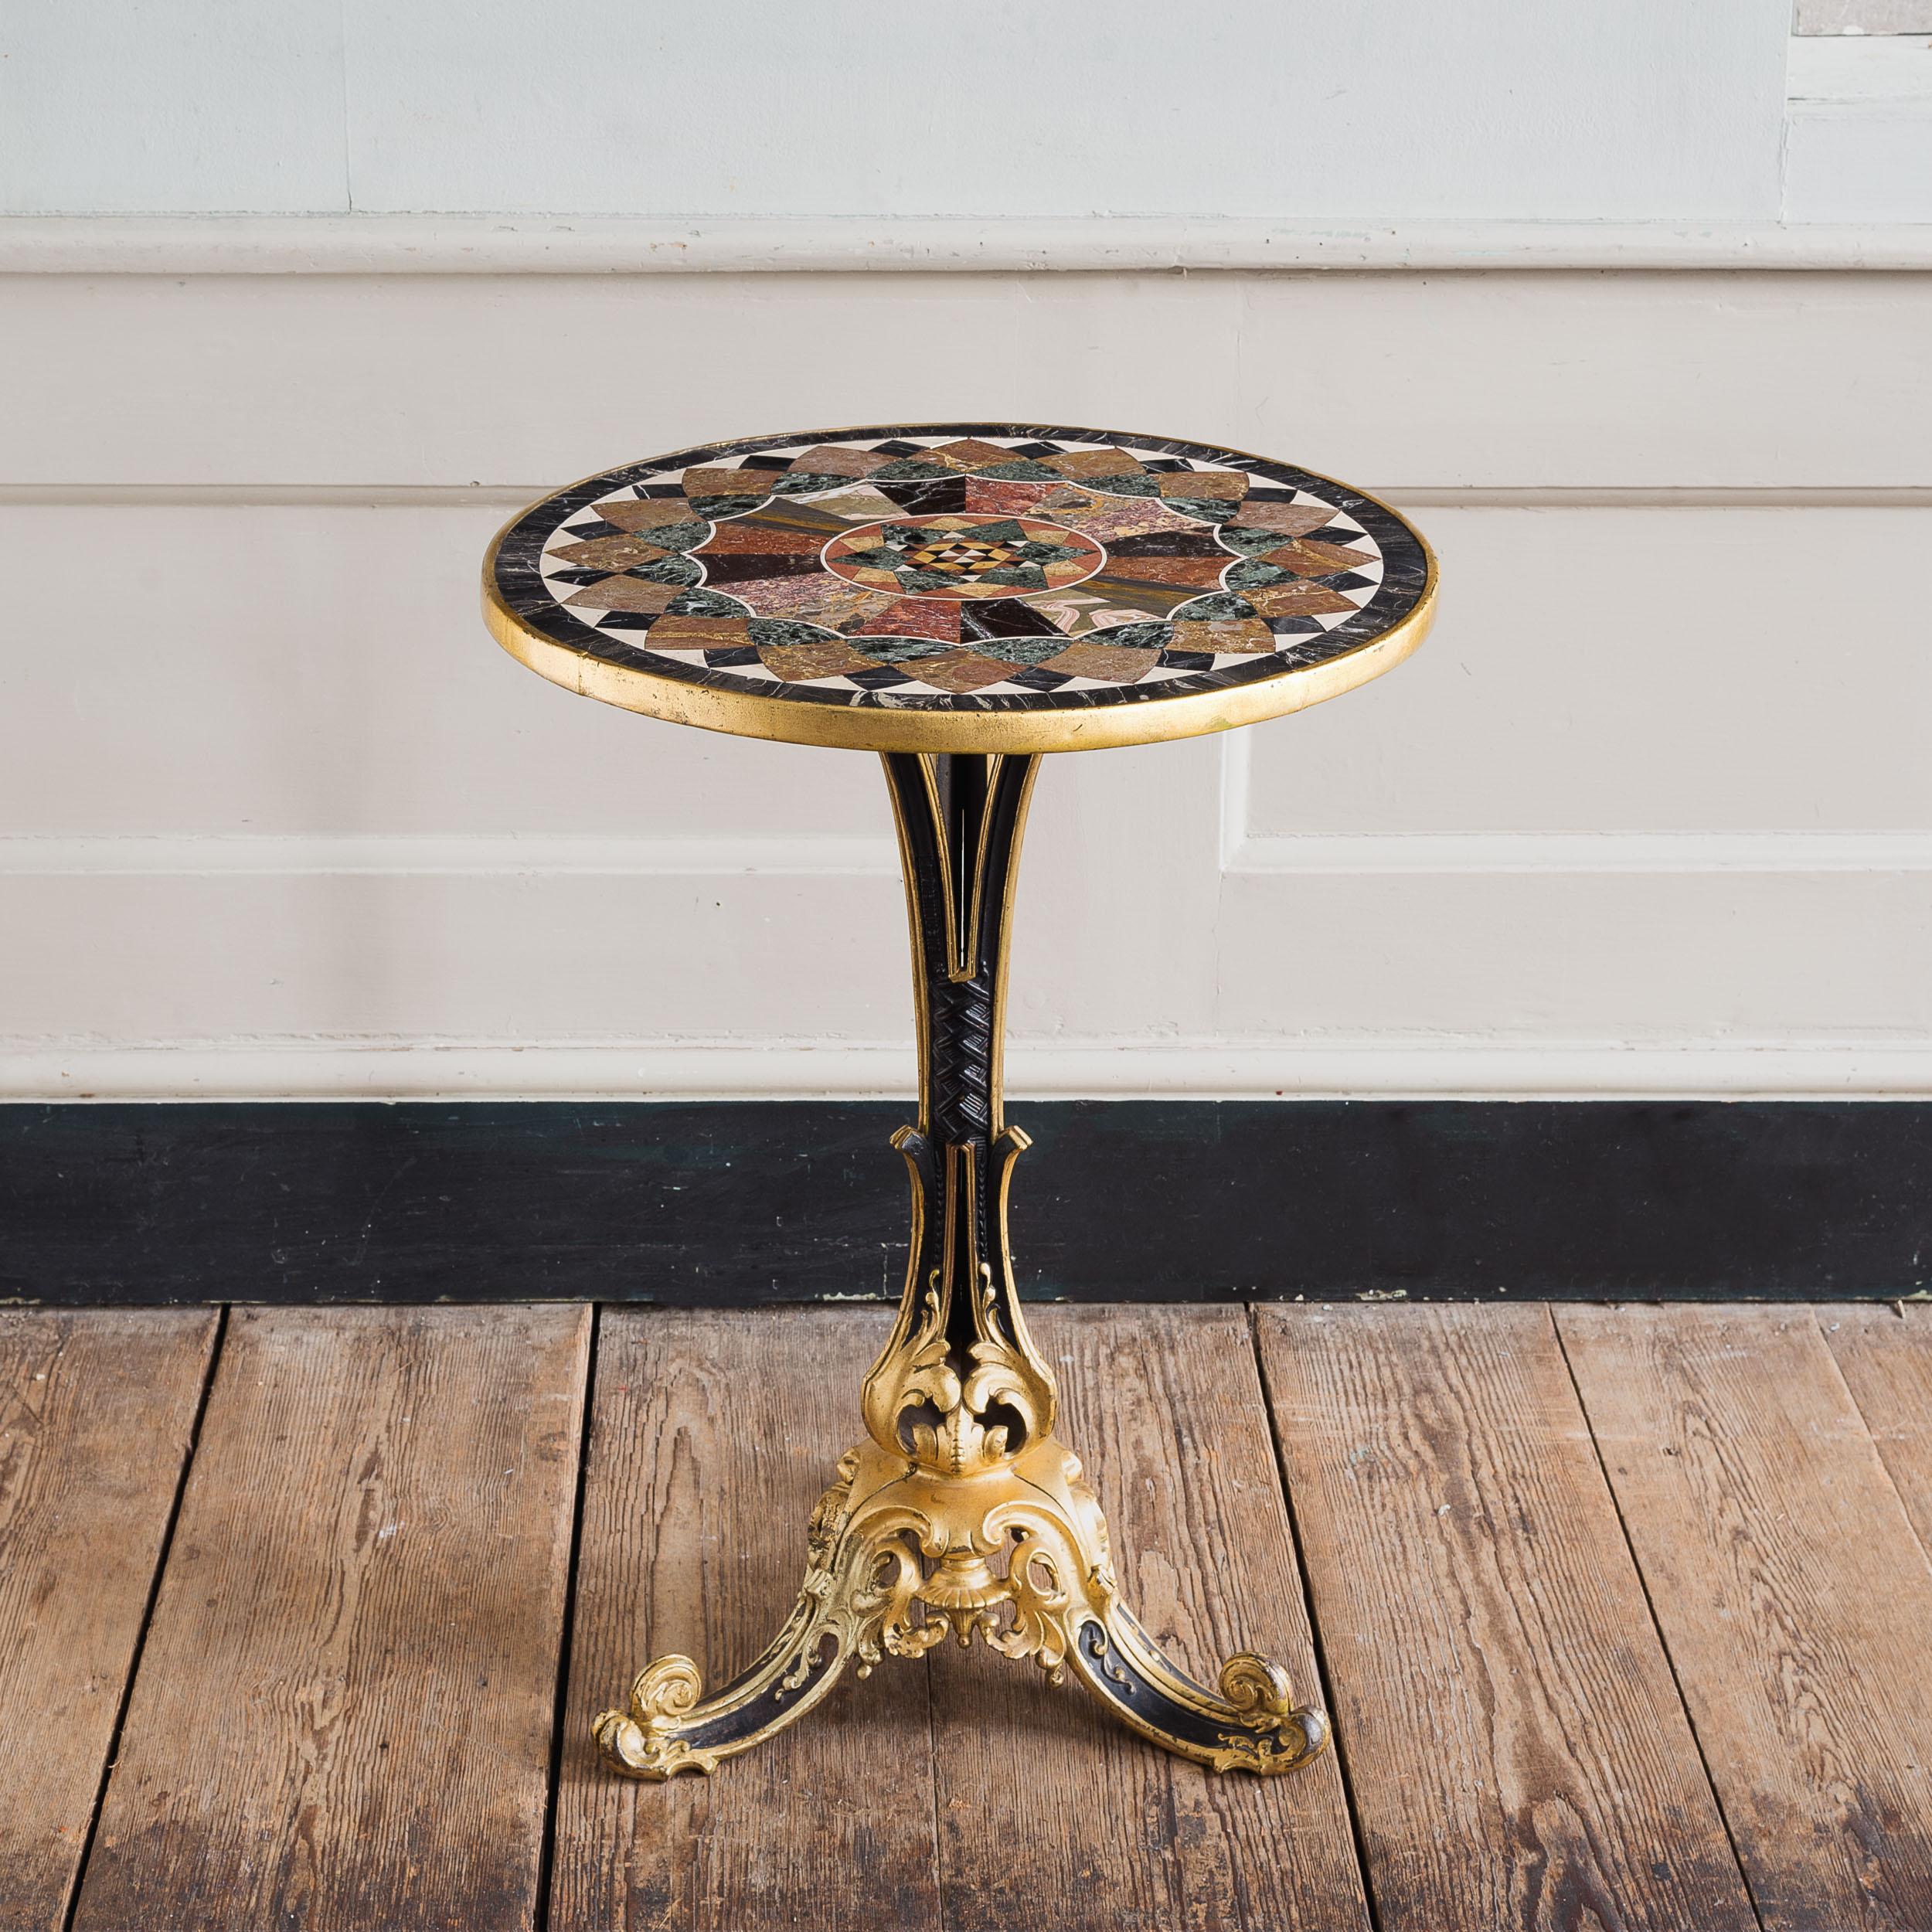 A fine Victorian parcel-gilt cast iron and specimen marble table, stamped 'THE ROTHERHAM', the top inlaid with marbles to a geometric design, c.1870-1880.

